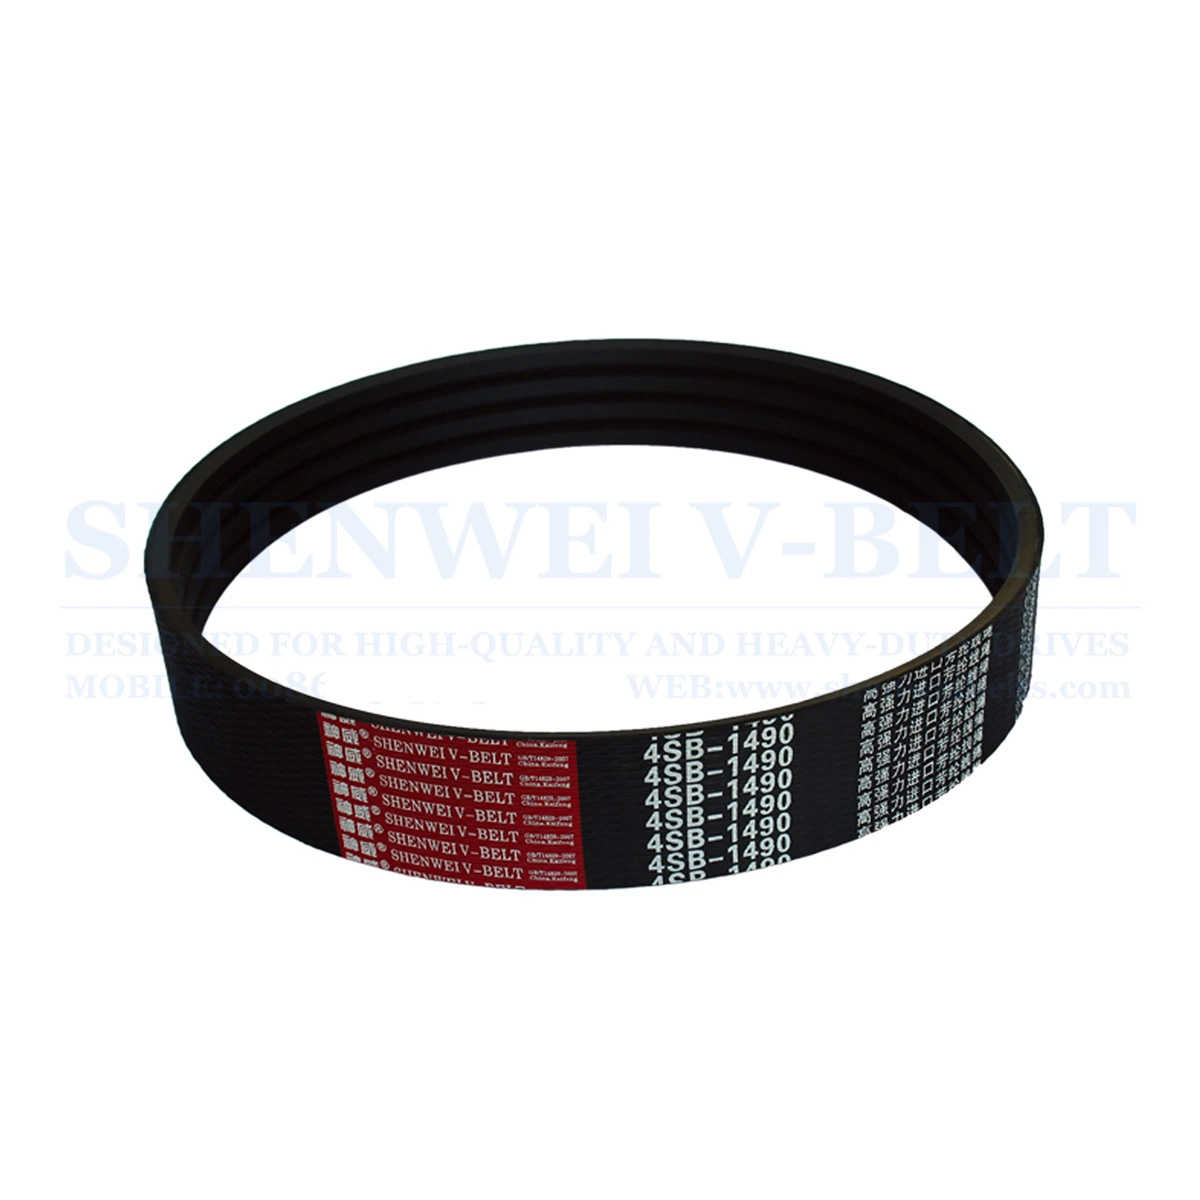 SC-112 Rubber Belt Parts For Harvester Machinery